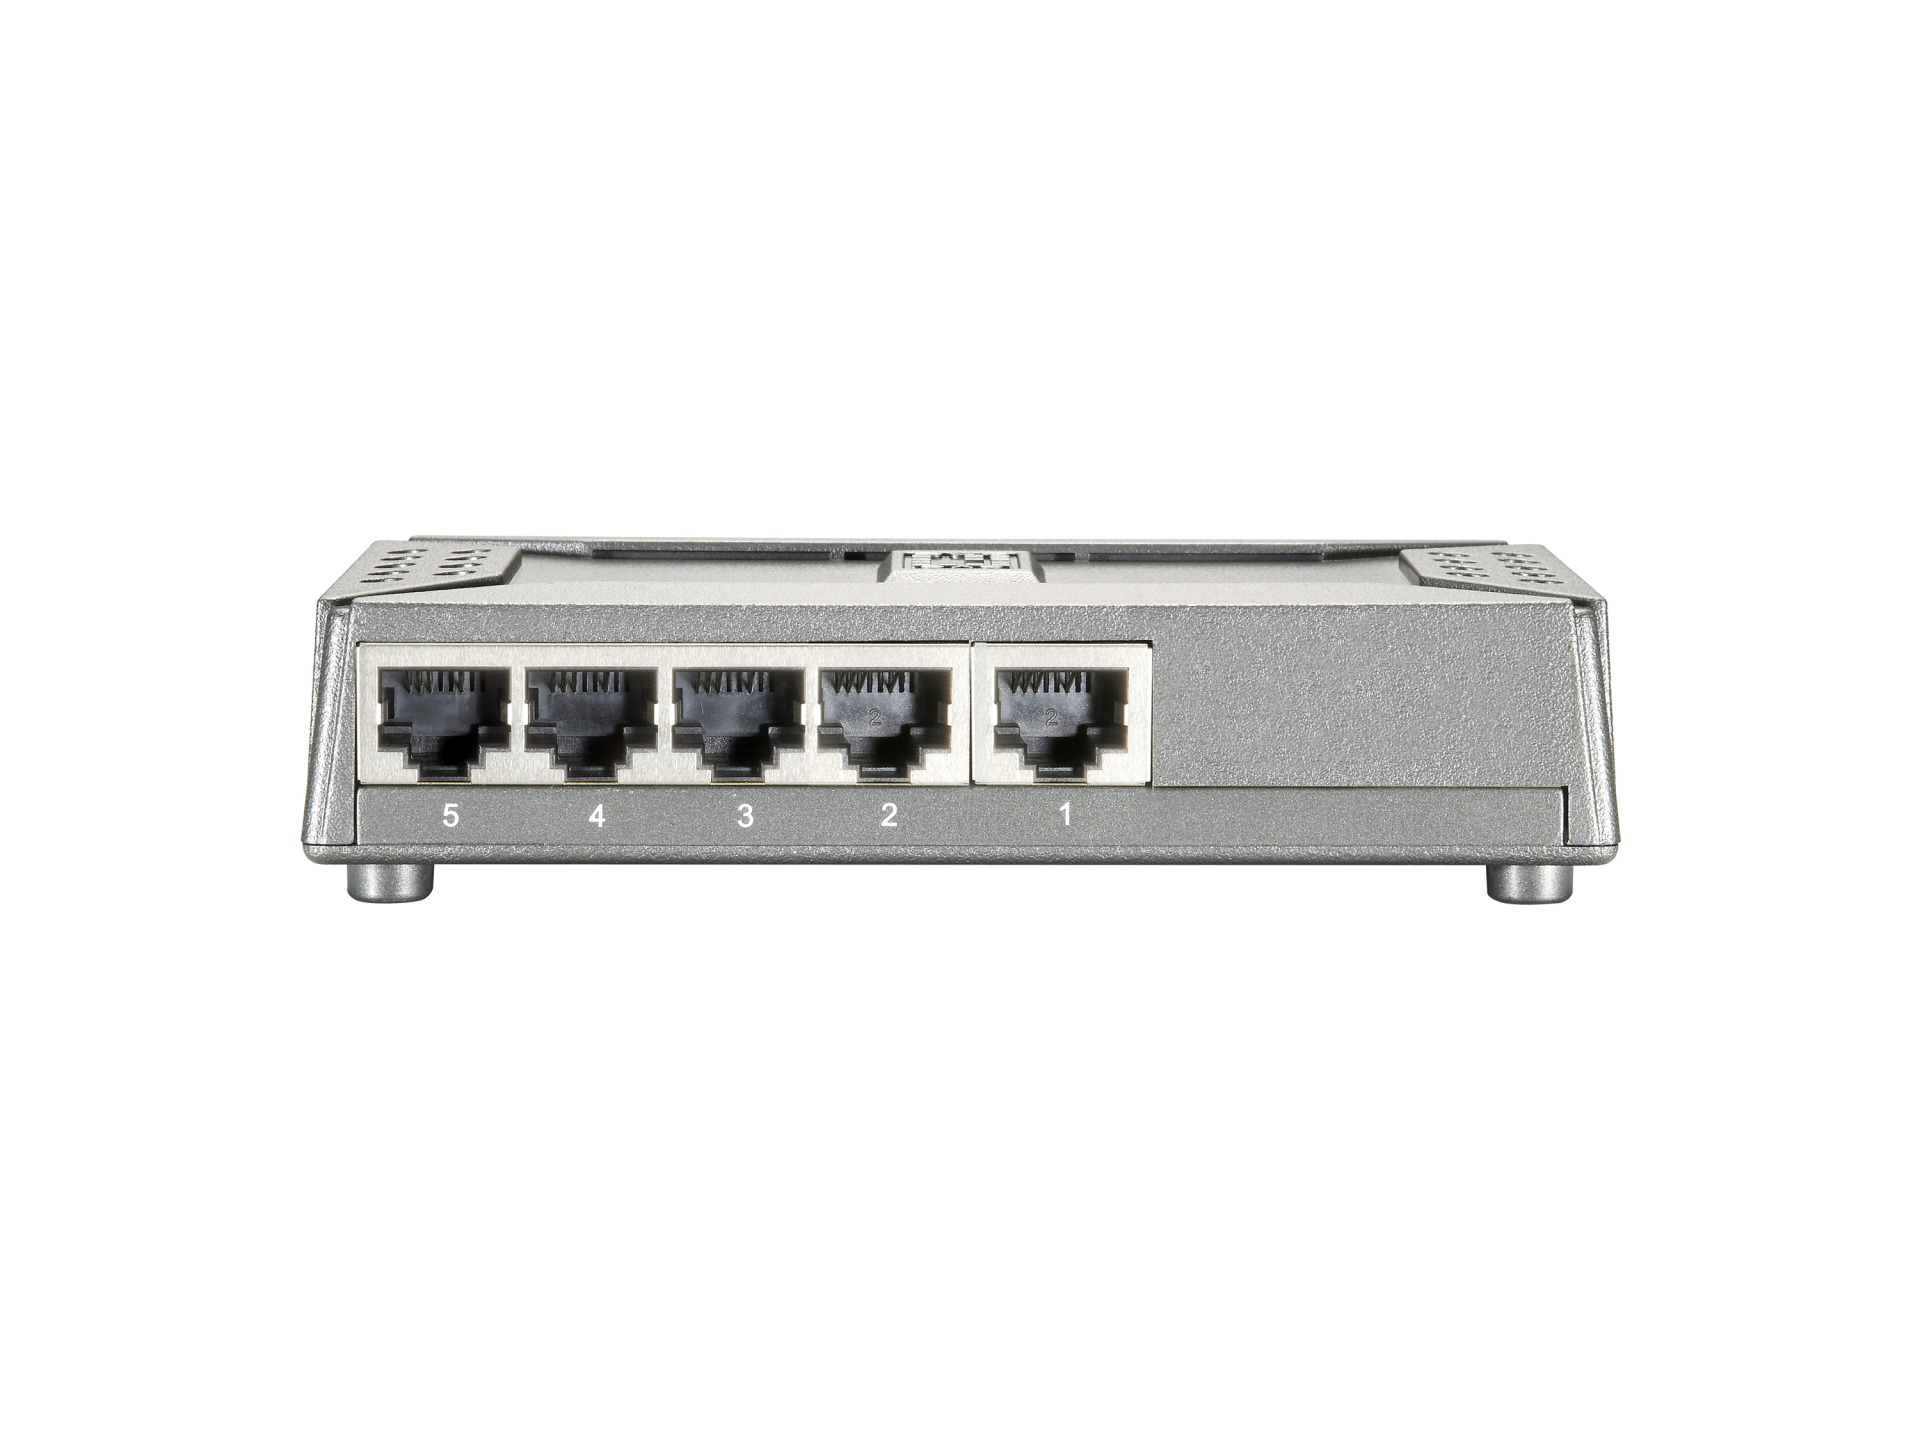 5-Port Fast Ethernet Switch, ultracompact